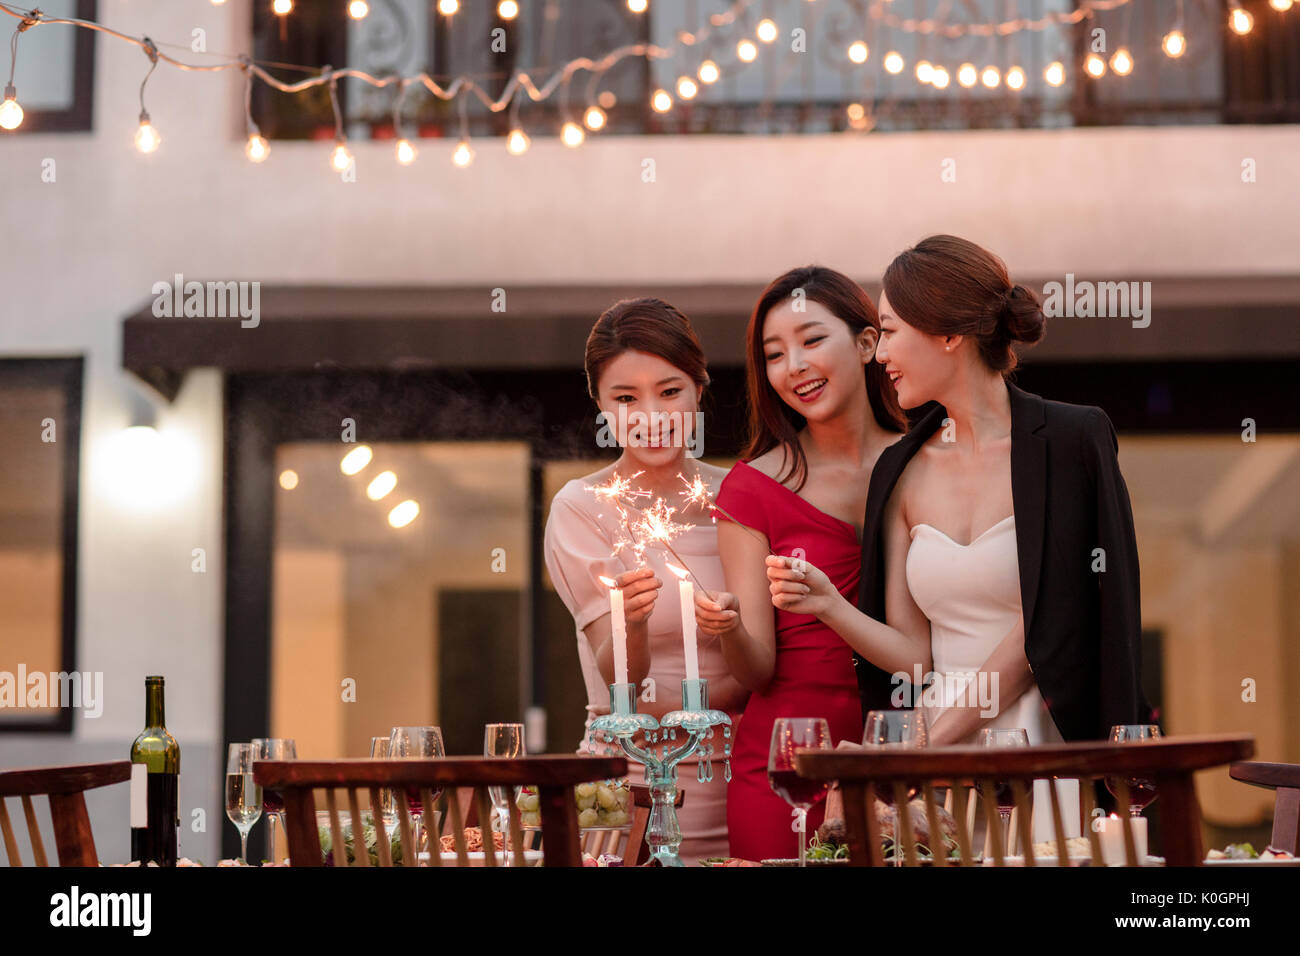 Three young smiling women with firecrackers enjoying a party at garden in the evening Stock Photo